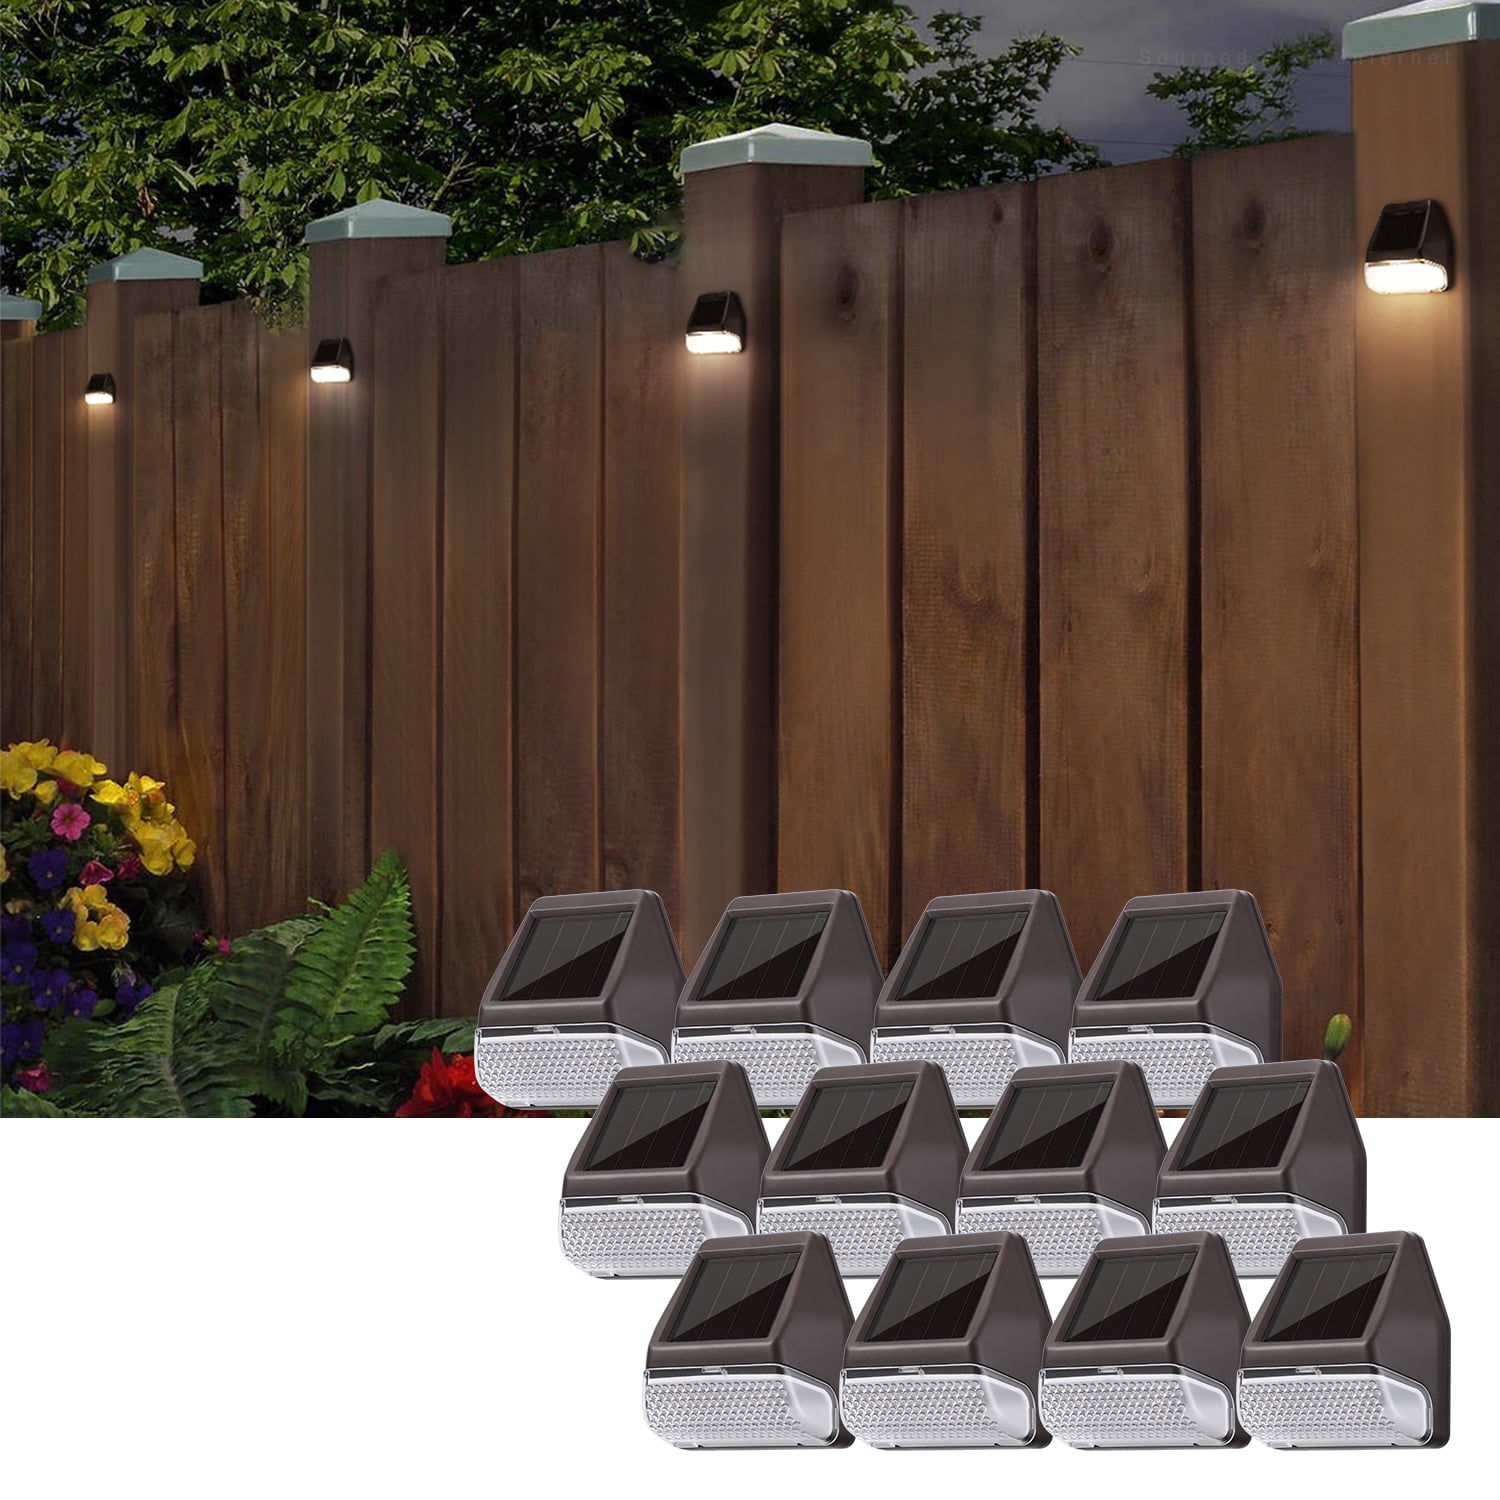 TORCHSTAR 12-Pack Solar-Powered LED Fence Light for Outdoor, Backyard, 4000K Cool White Deck Lights, 90° Beam Angle Post Night Lighting, Stairs Decoration, Rubbed - Walmart.com